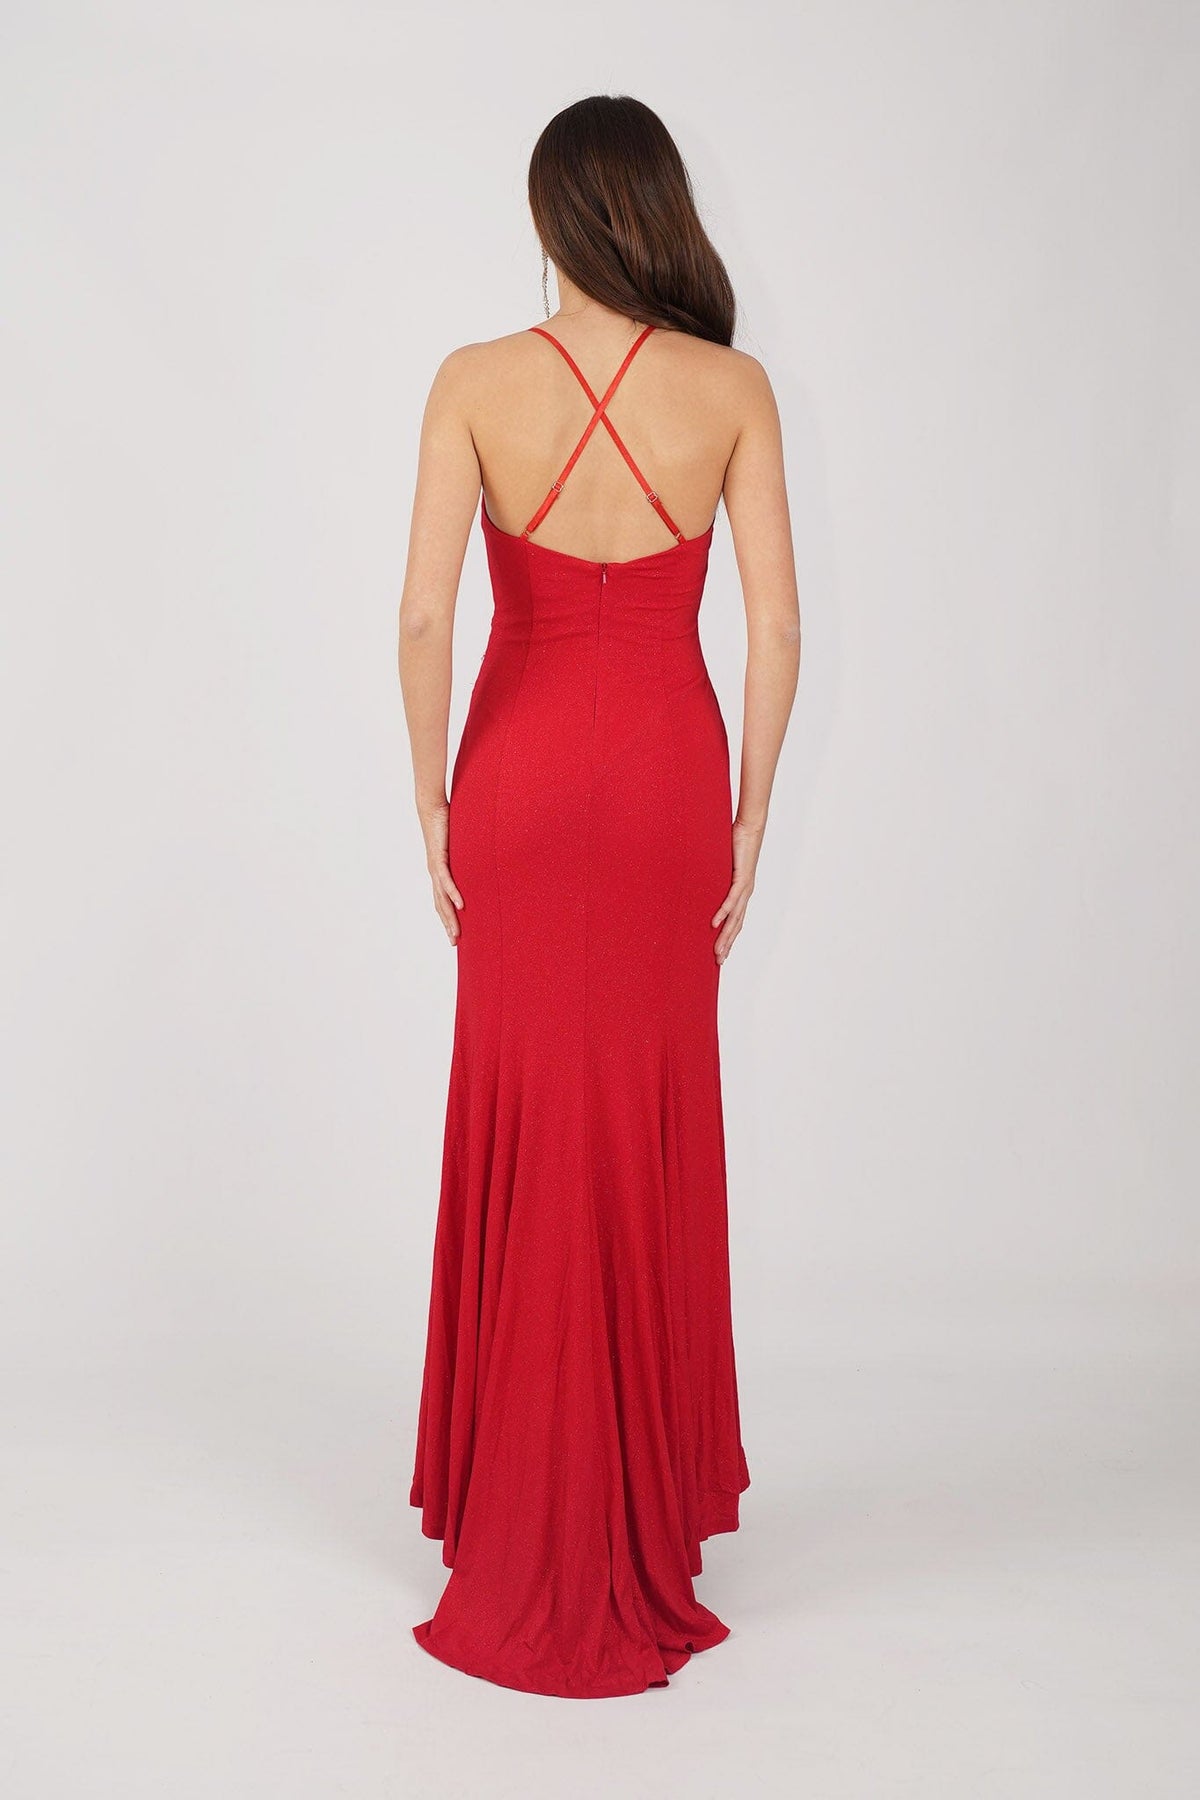 Crisscross Open Back of Red Shimmer Fitted Maxi Dress with Thin Shoulder Straps, Gathered Detail at Waist and Leg Slit